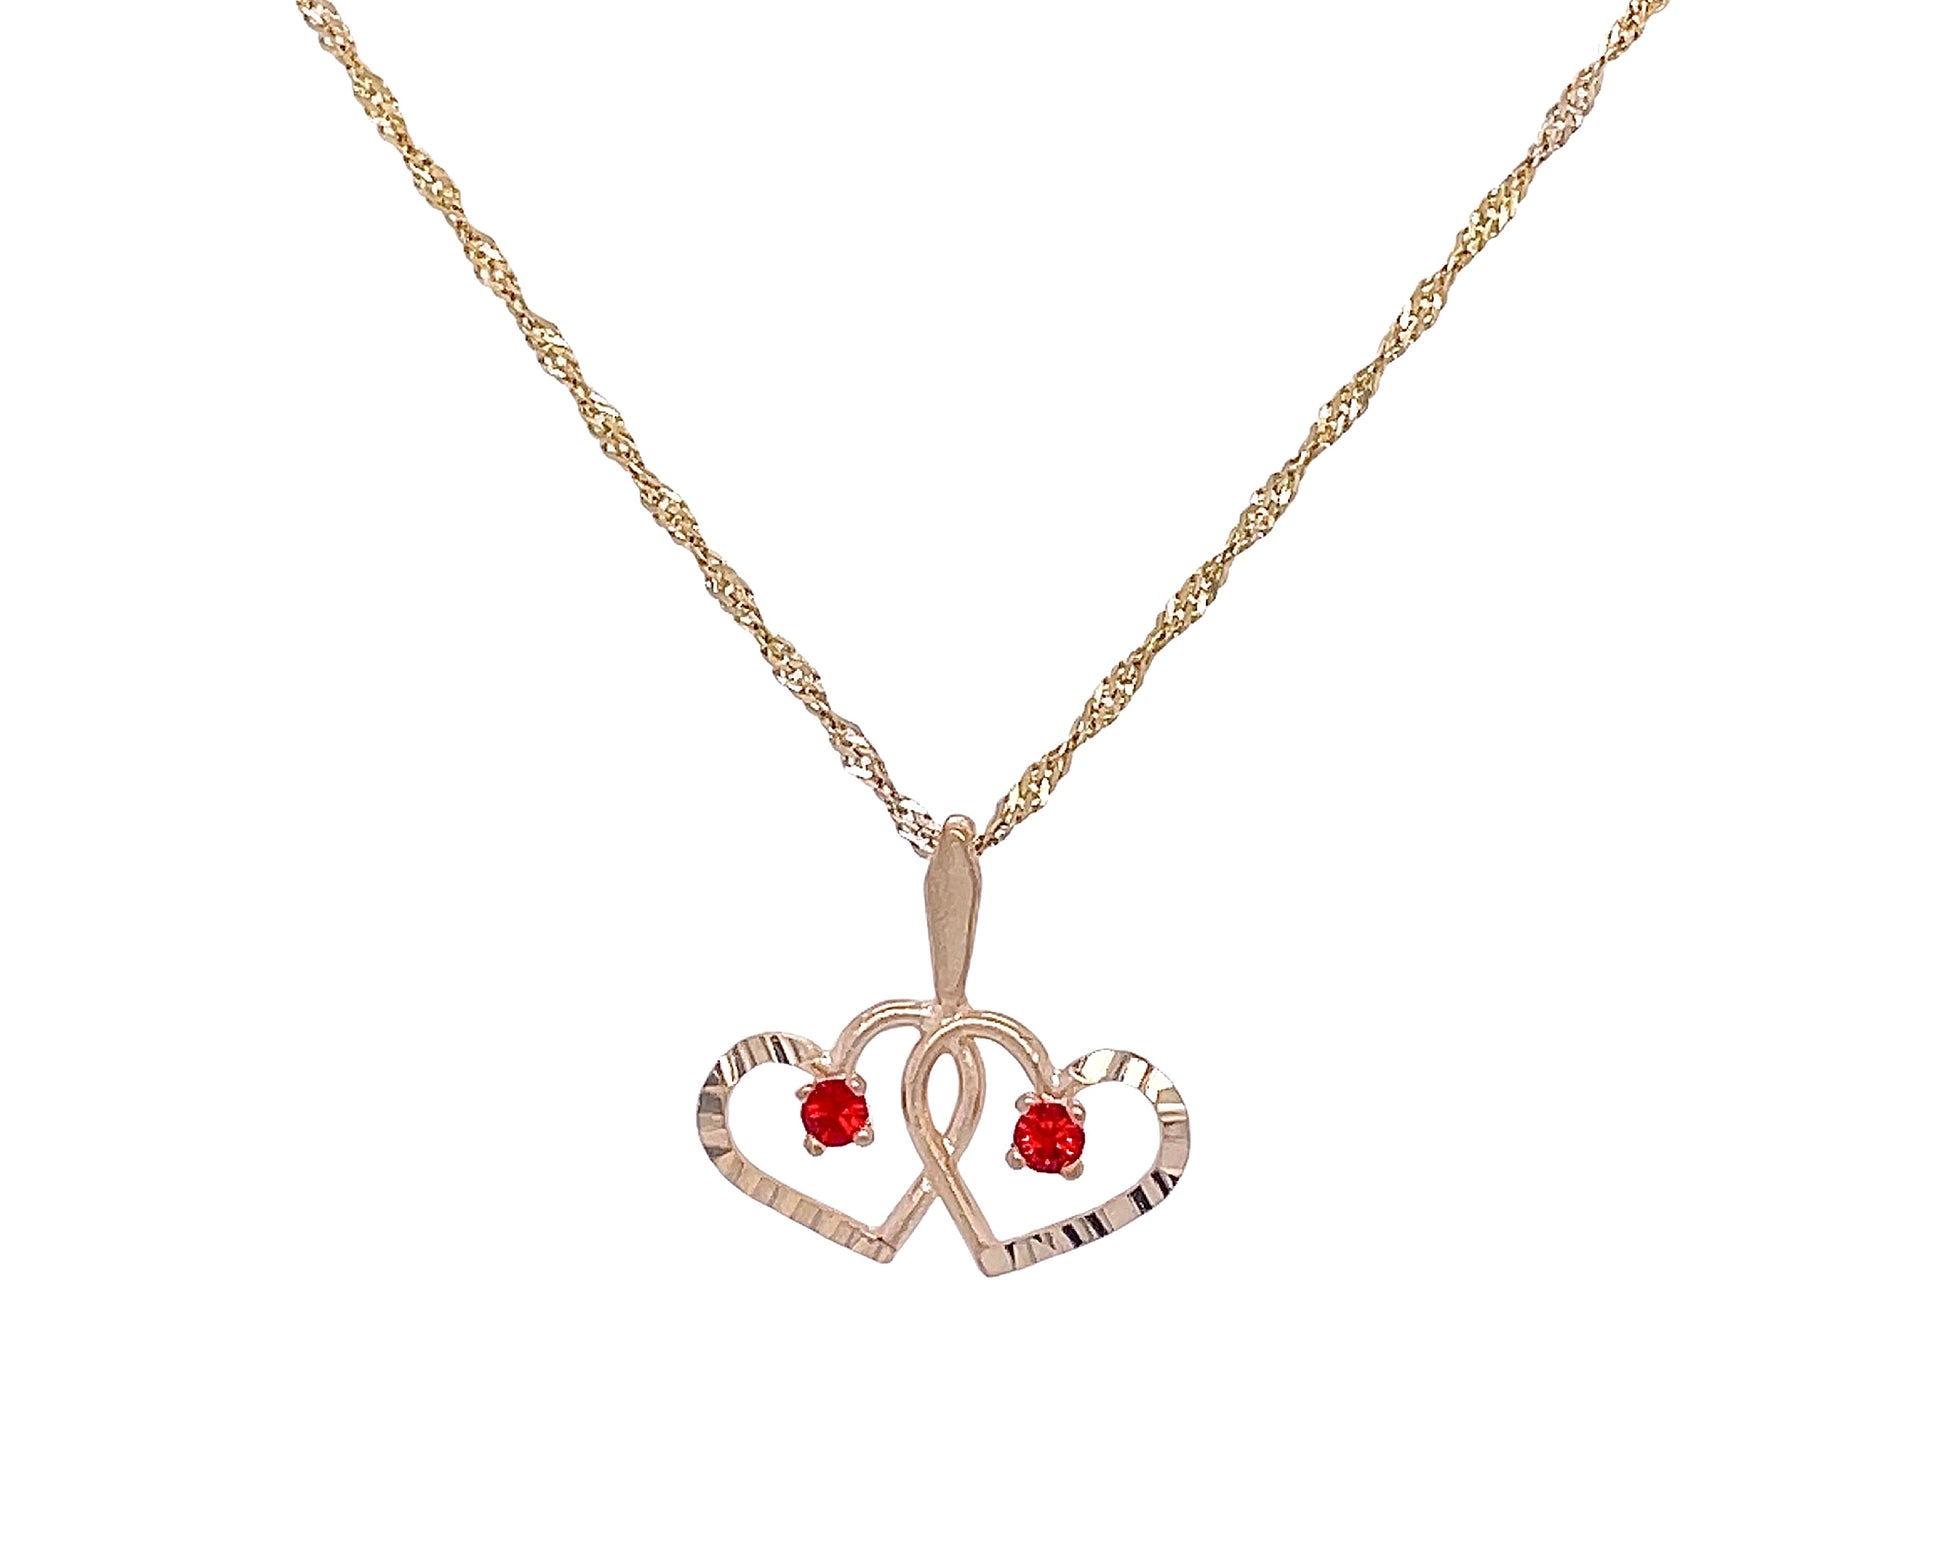 10k yellow gold double heart necklace with garnet stone 